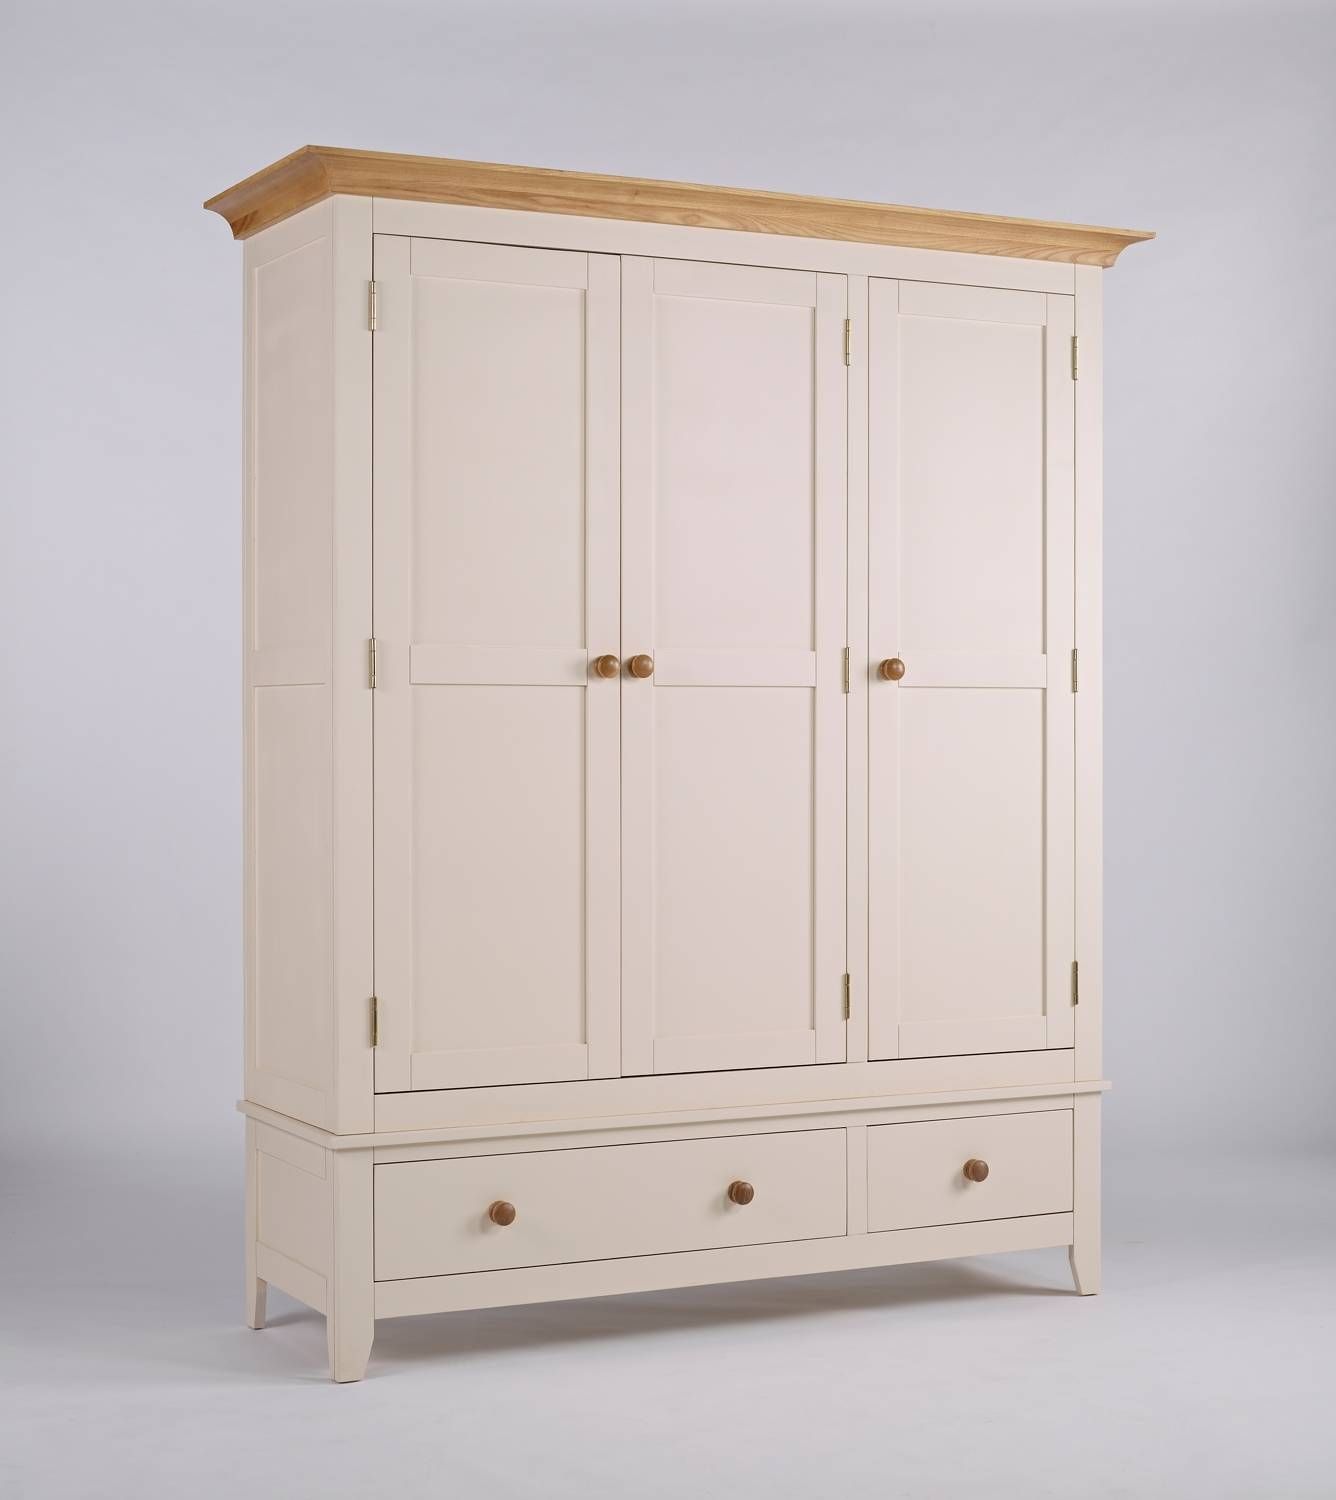 New England Ivory Large Wardrobe | Hampshire Furniture For Hampshire Wardrobes (View 3 of 15)